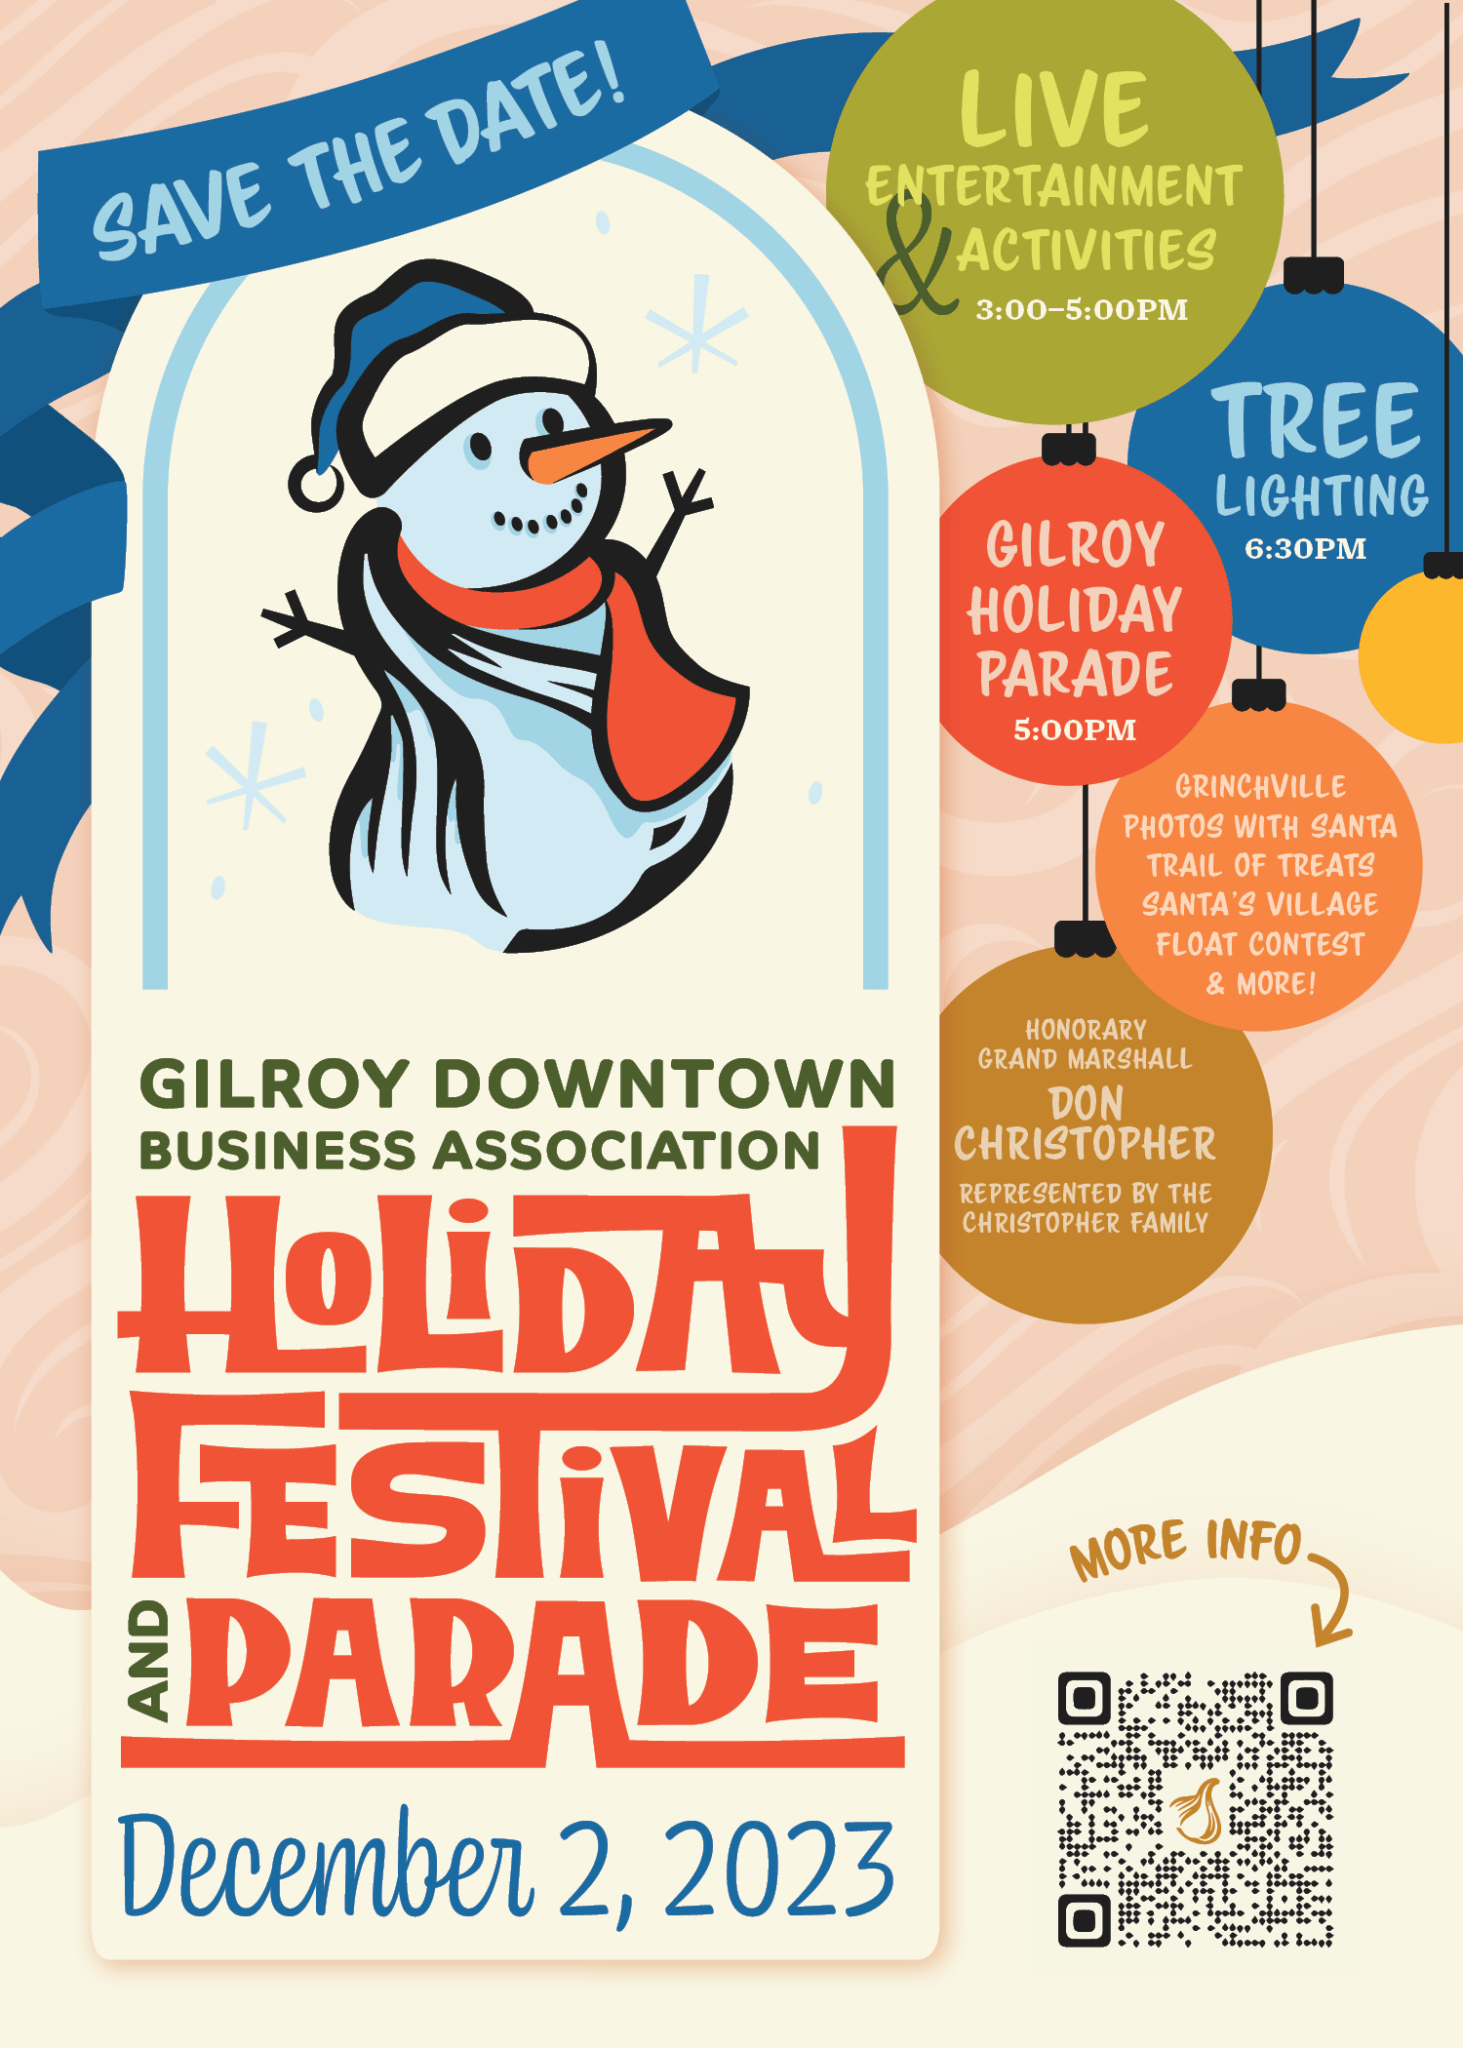 Downtown Gilroy Holiday Festival and Parade Visit Gilroy